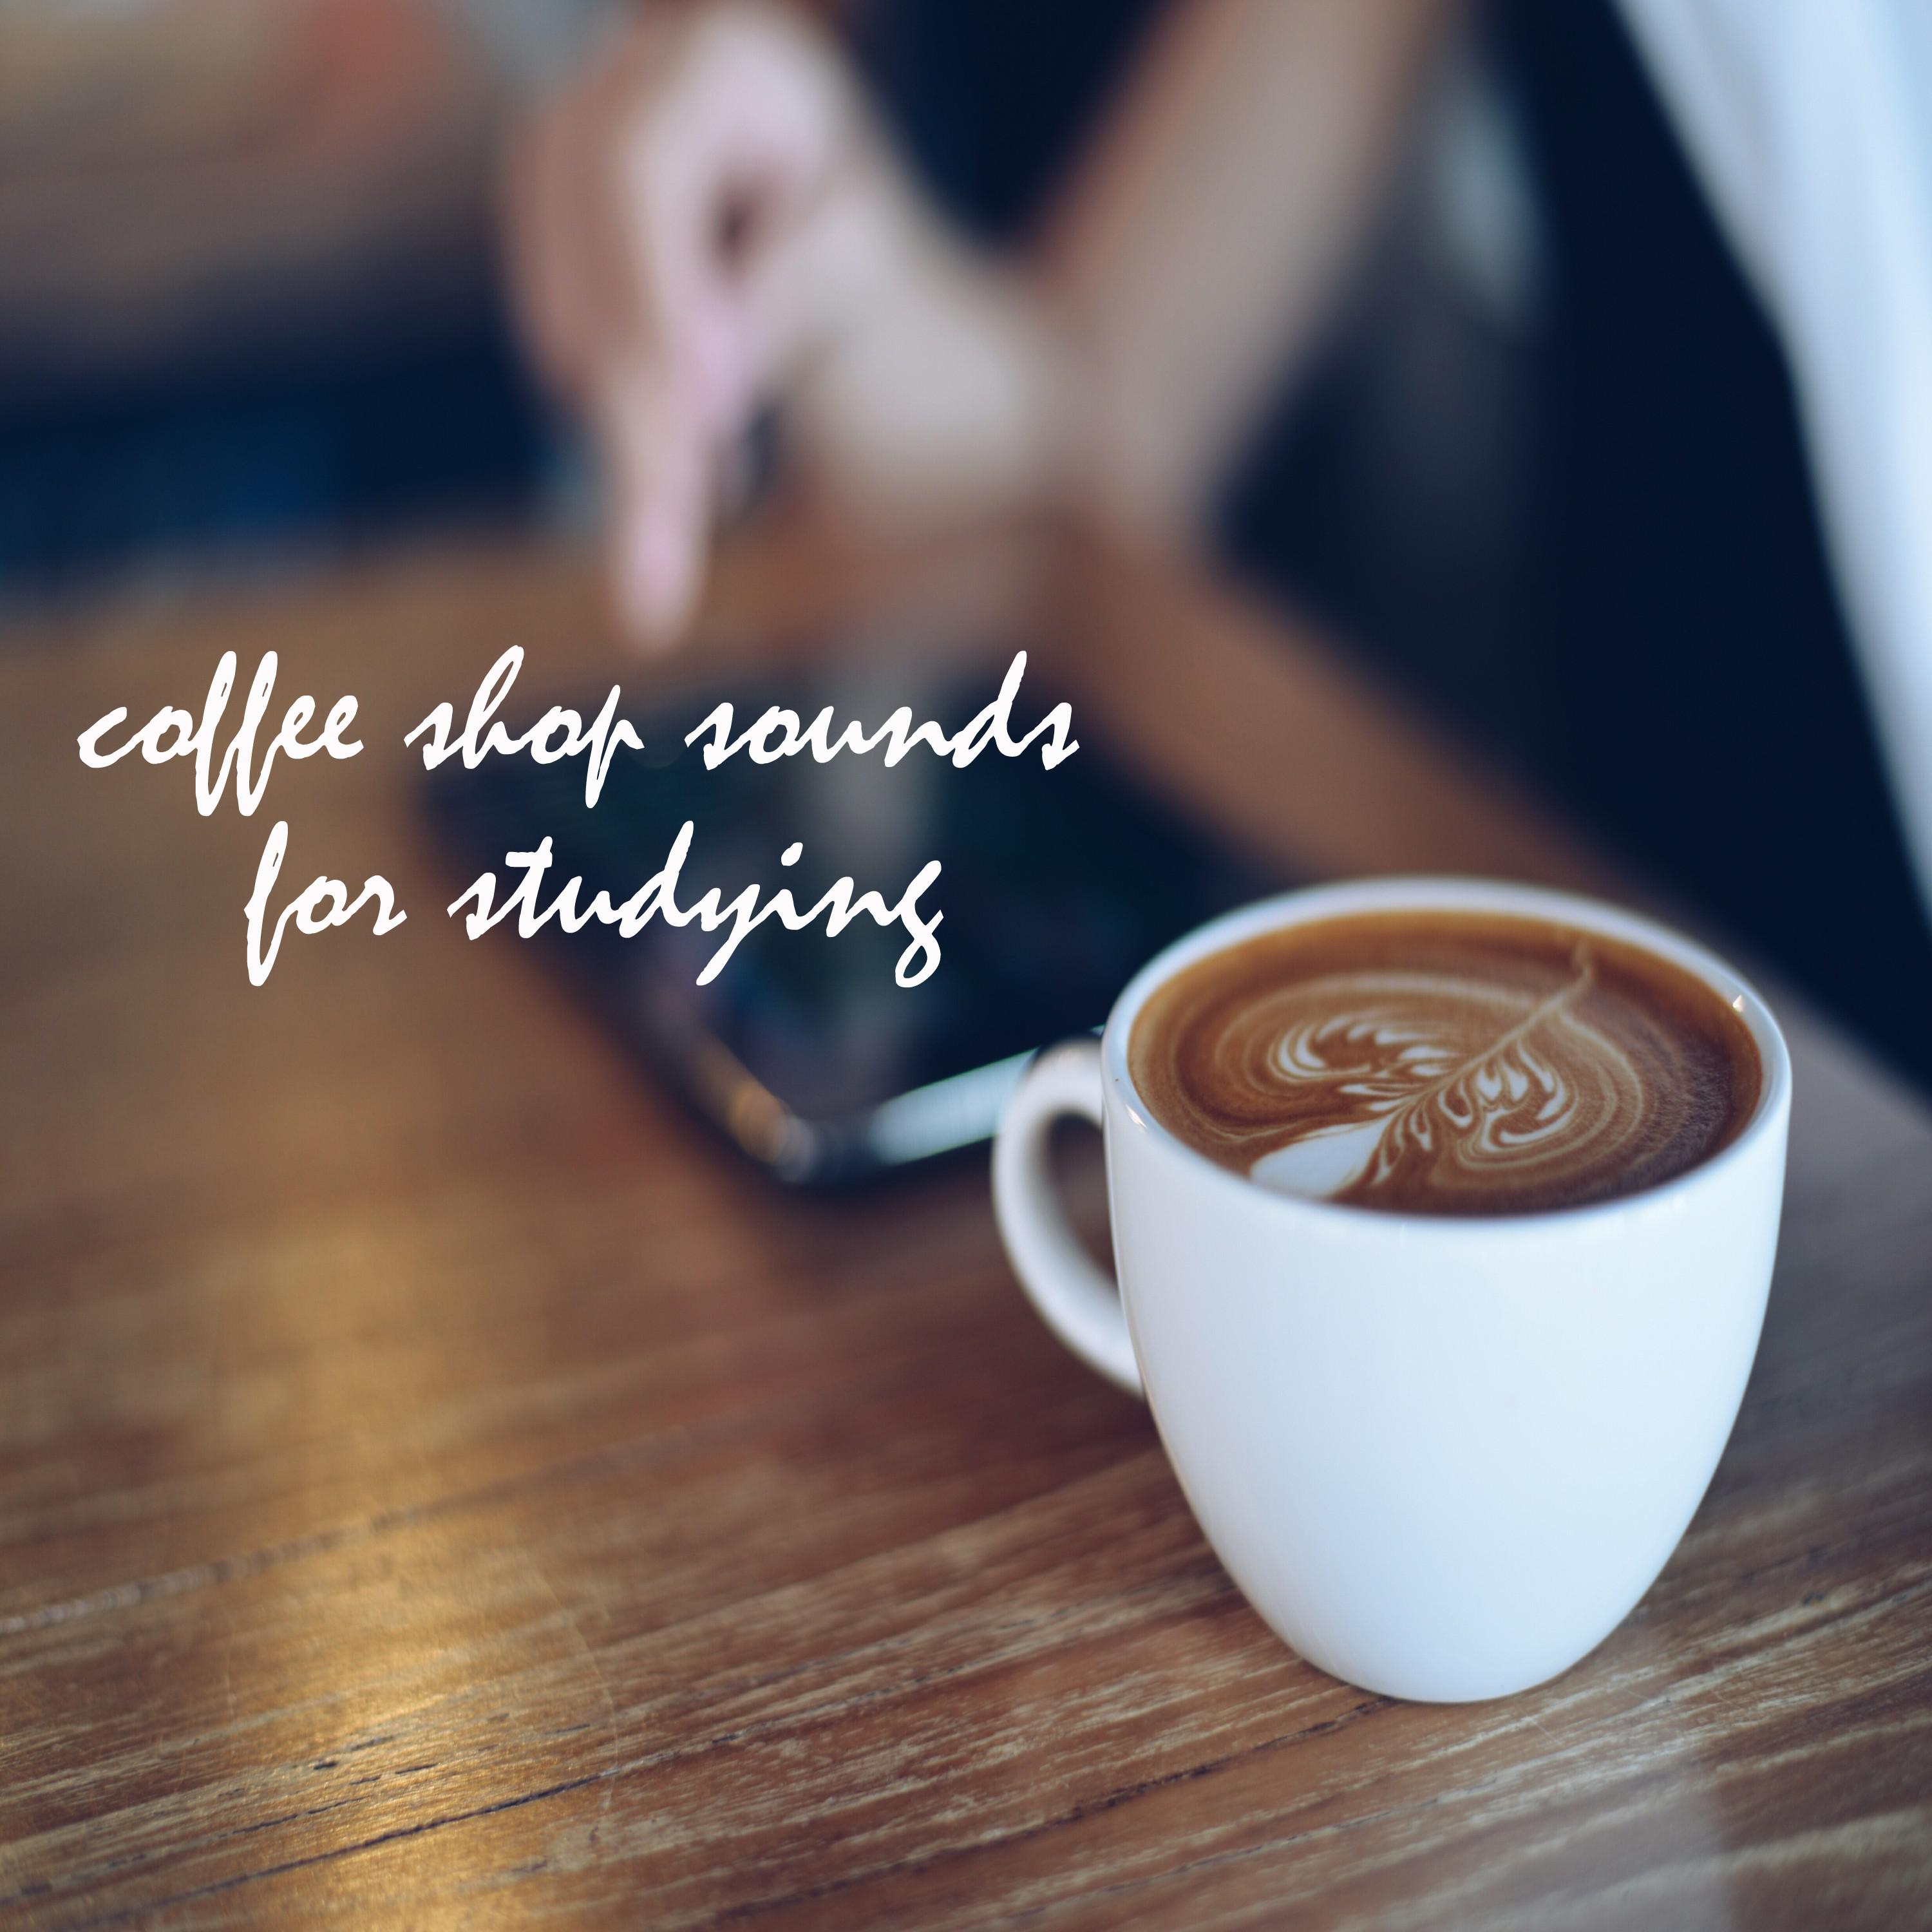 Coffee Shop Sounds for Studying and Working, Pt. 01